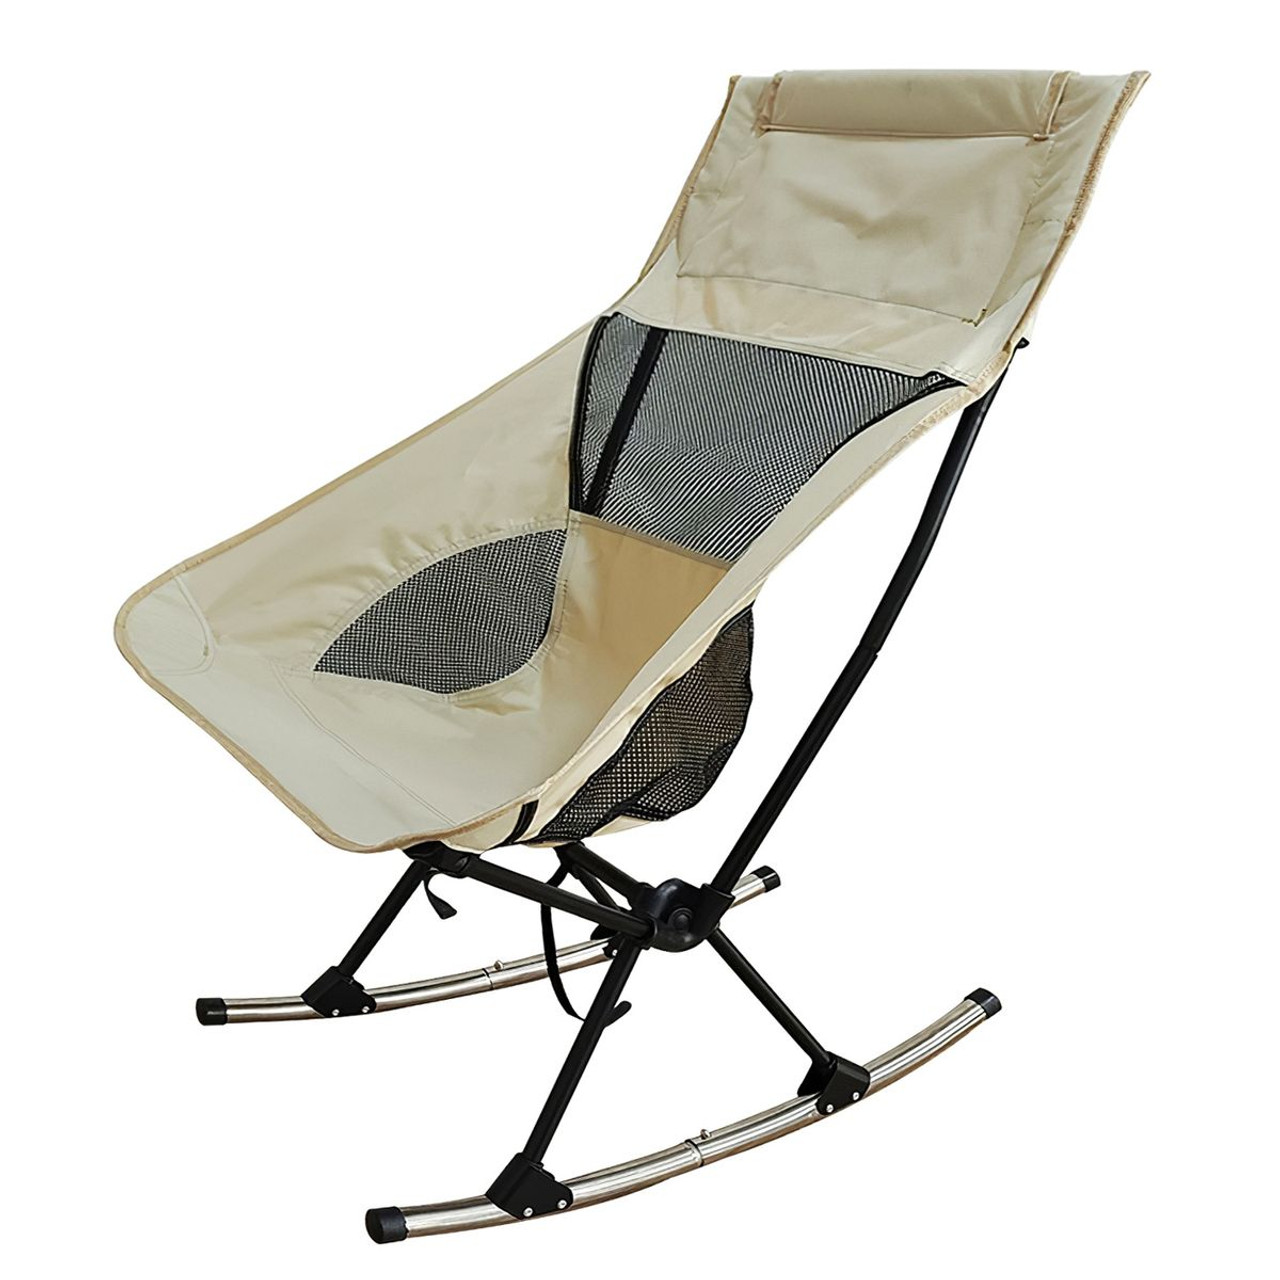 LakeForest® Camping Rocking Chair product image